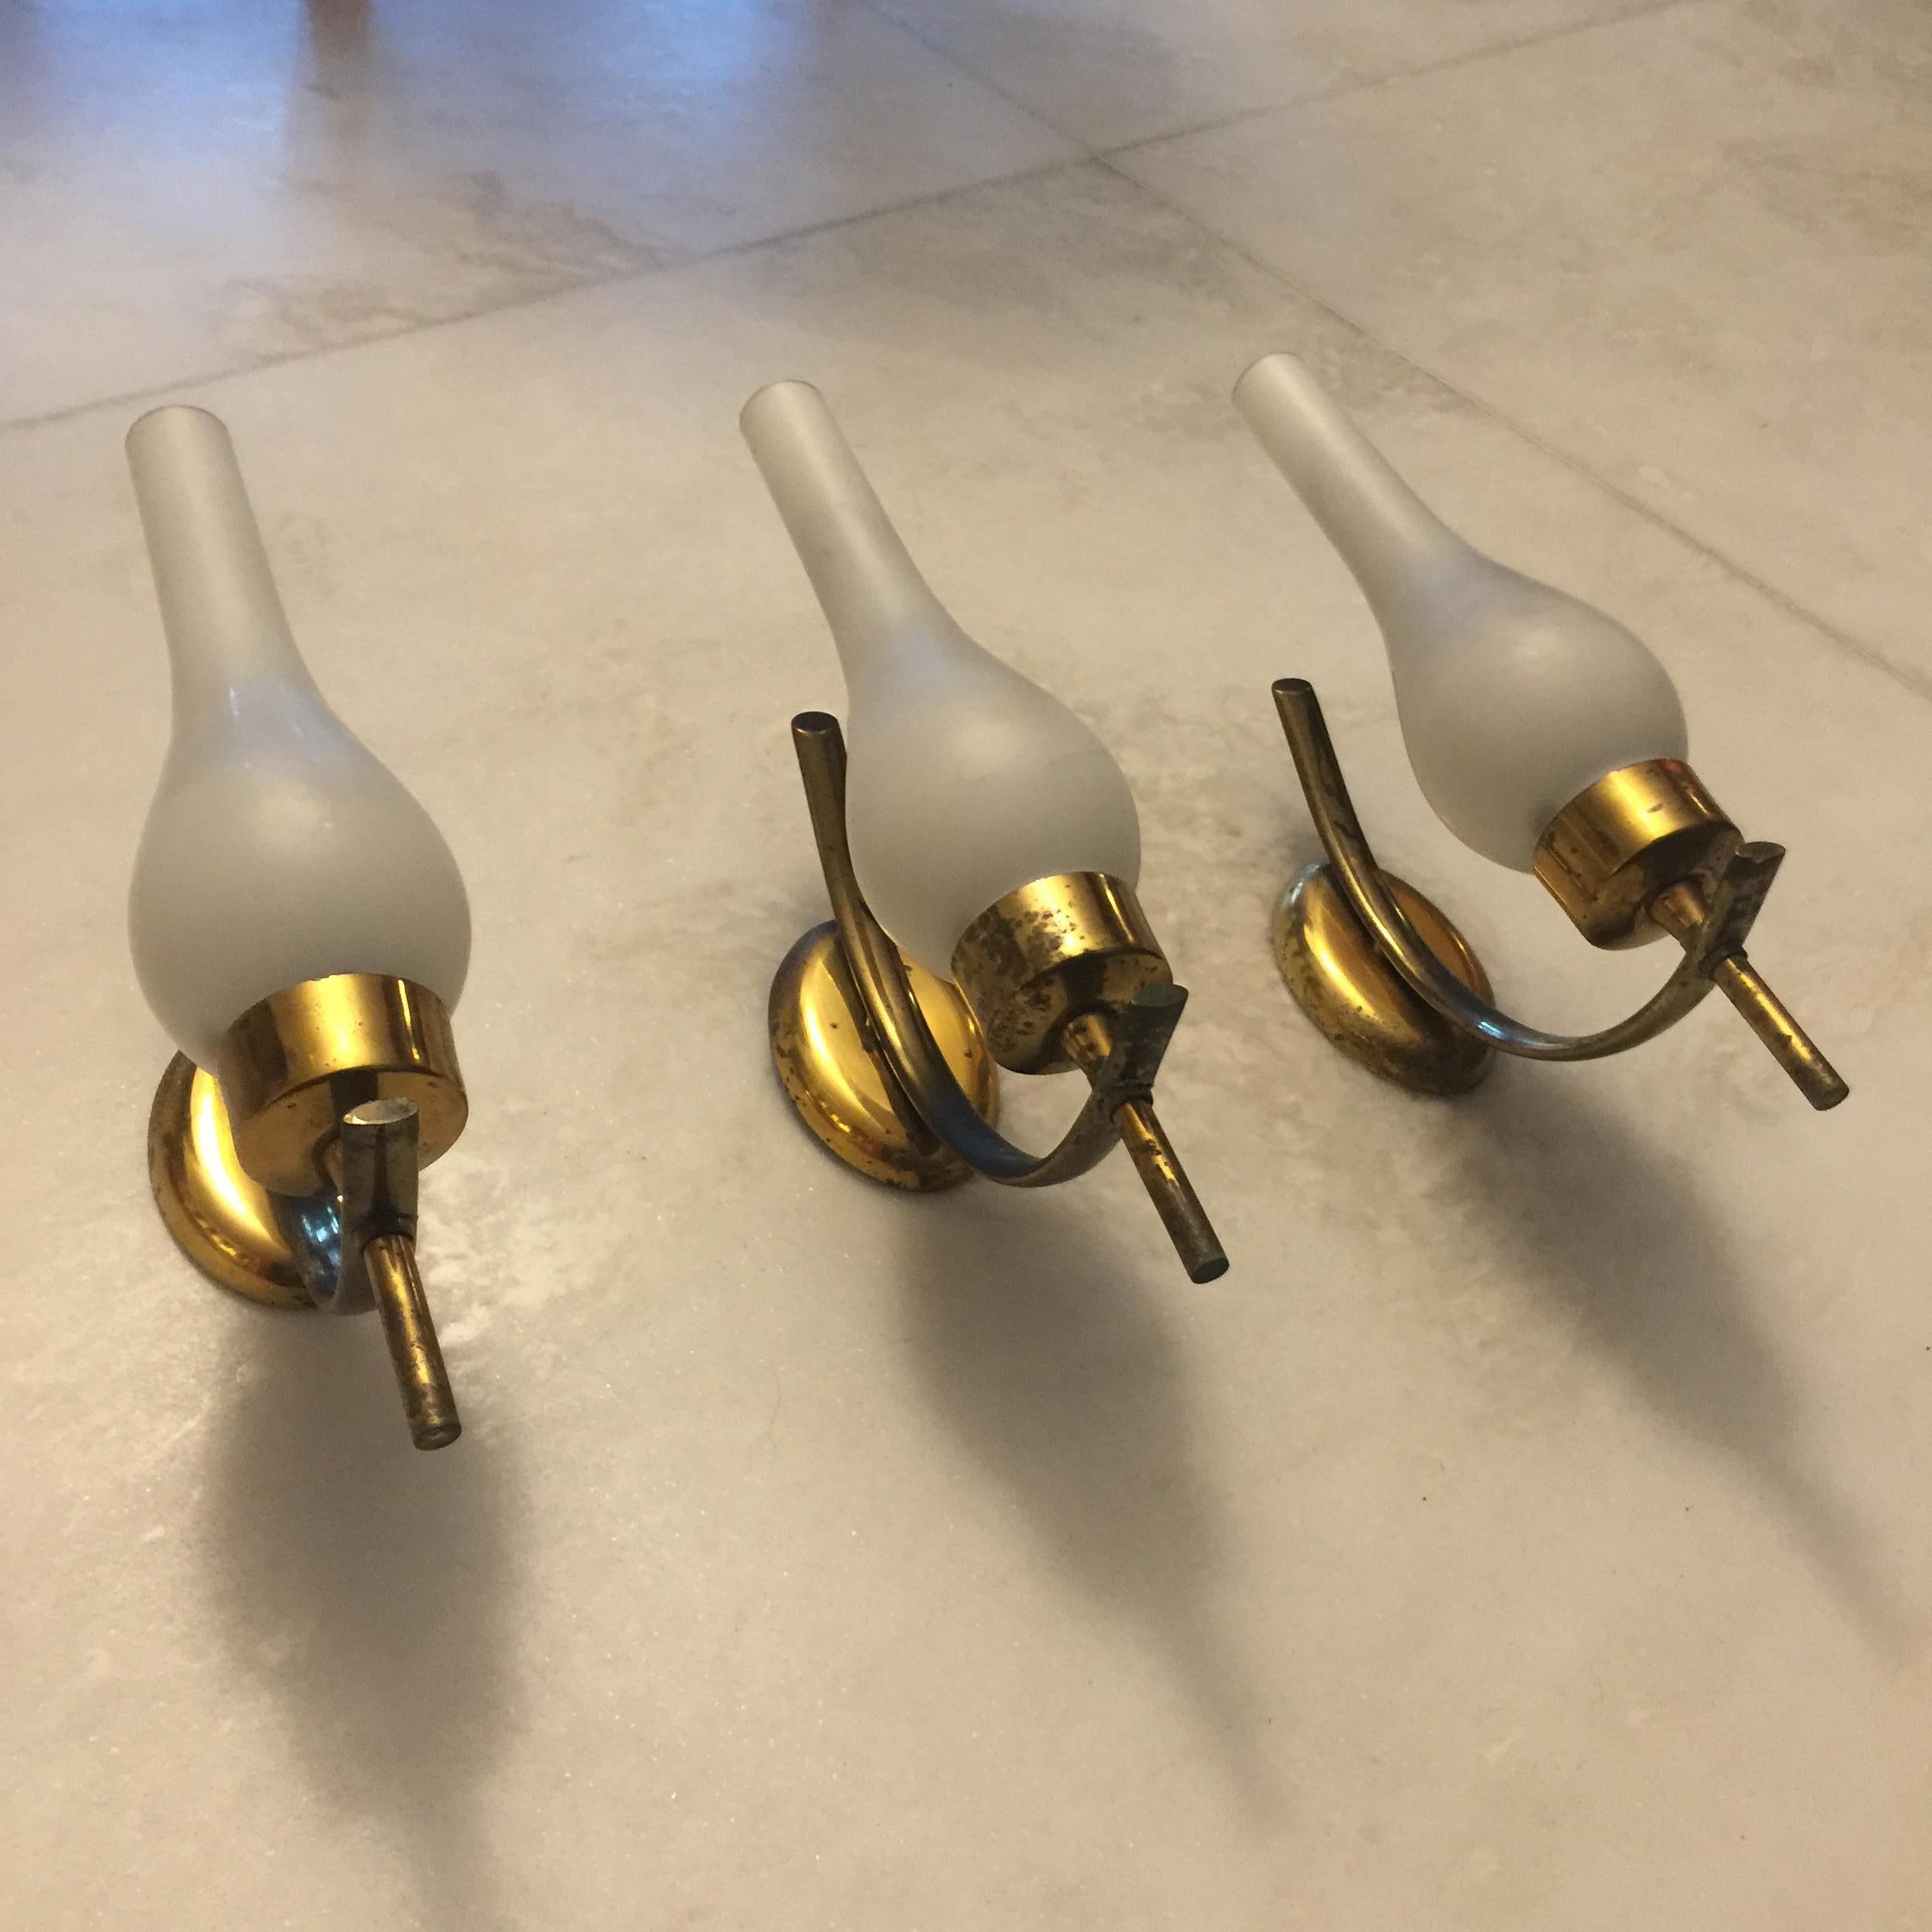 Set of Three Italian Brass and Opaline Glass Sconces, Arredoluce Style, 1950s For Sale 1